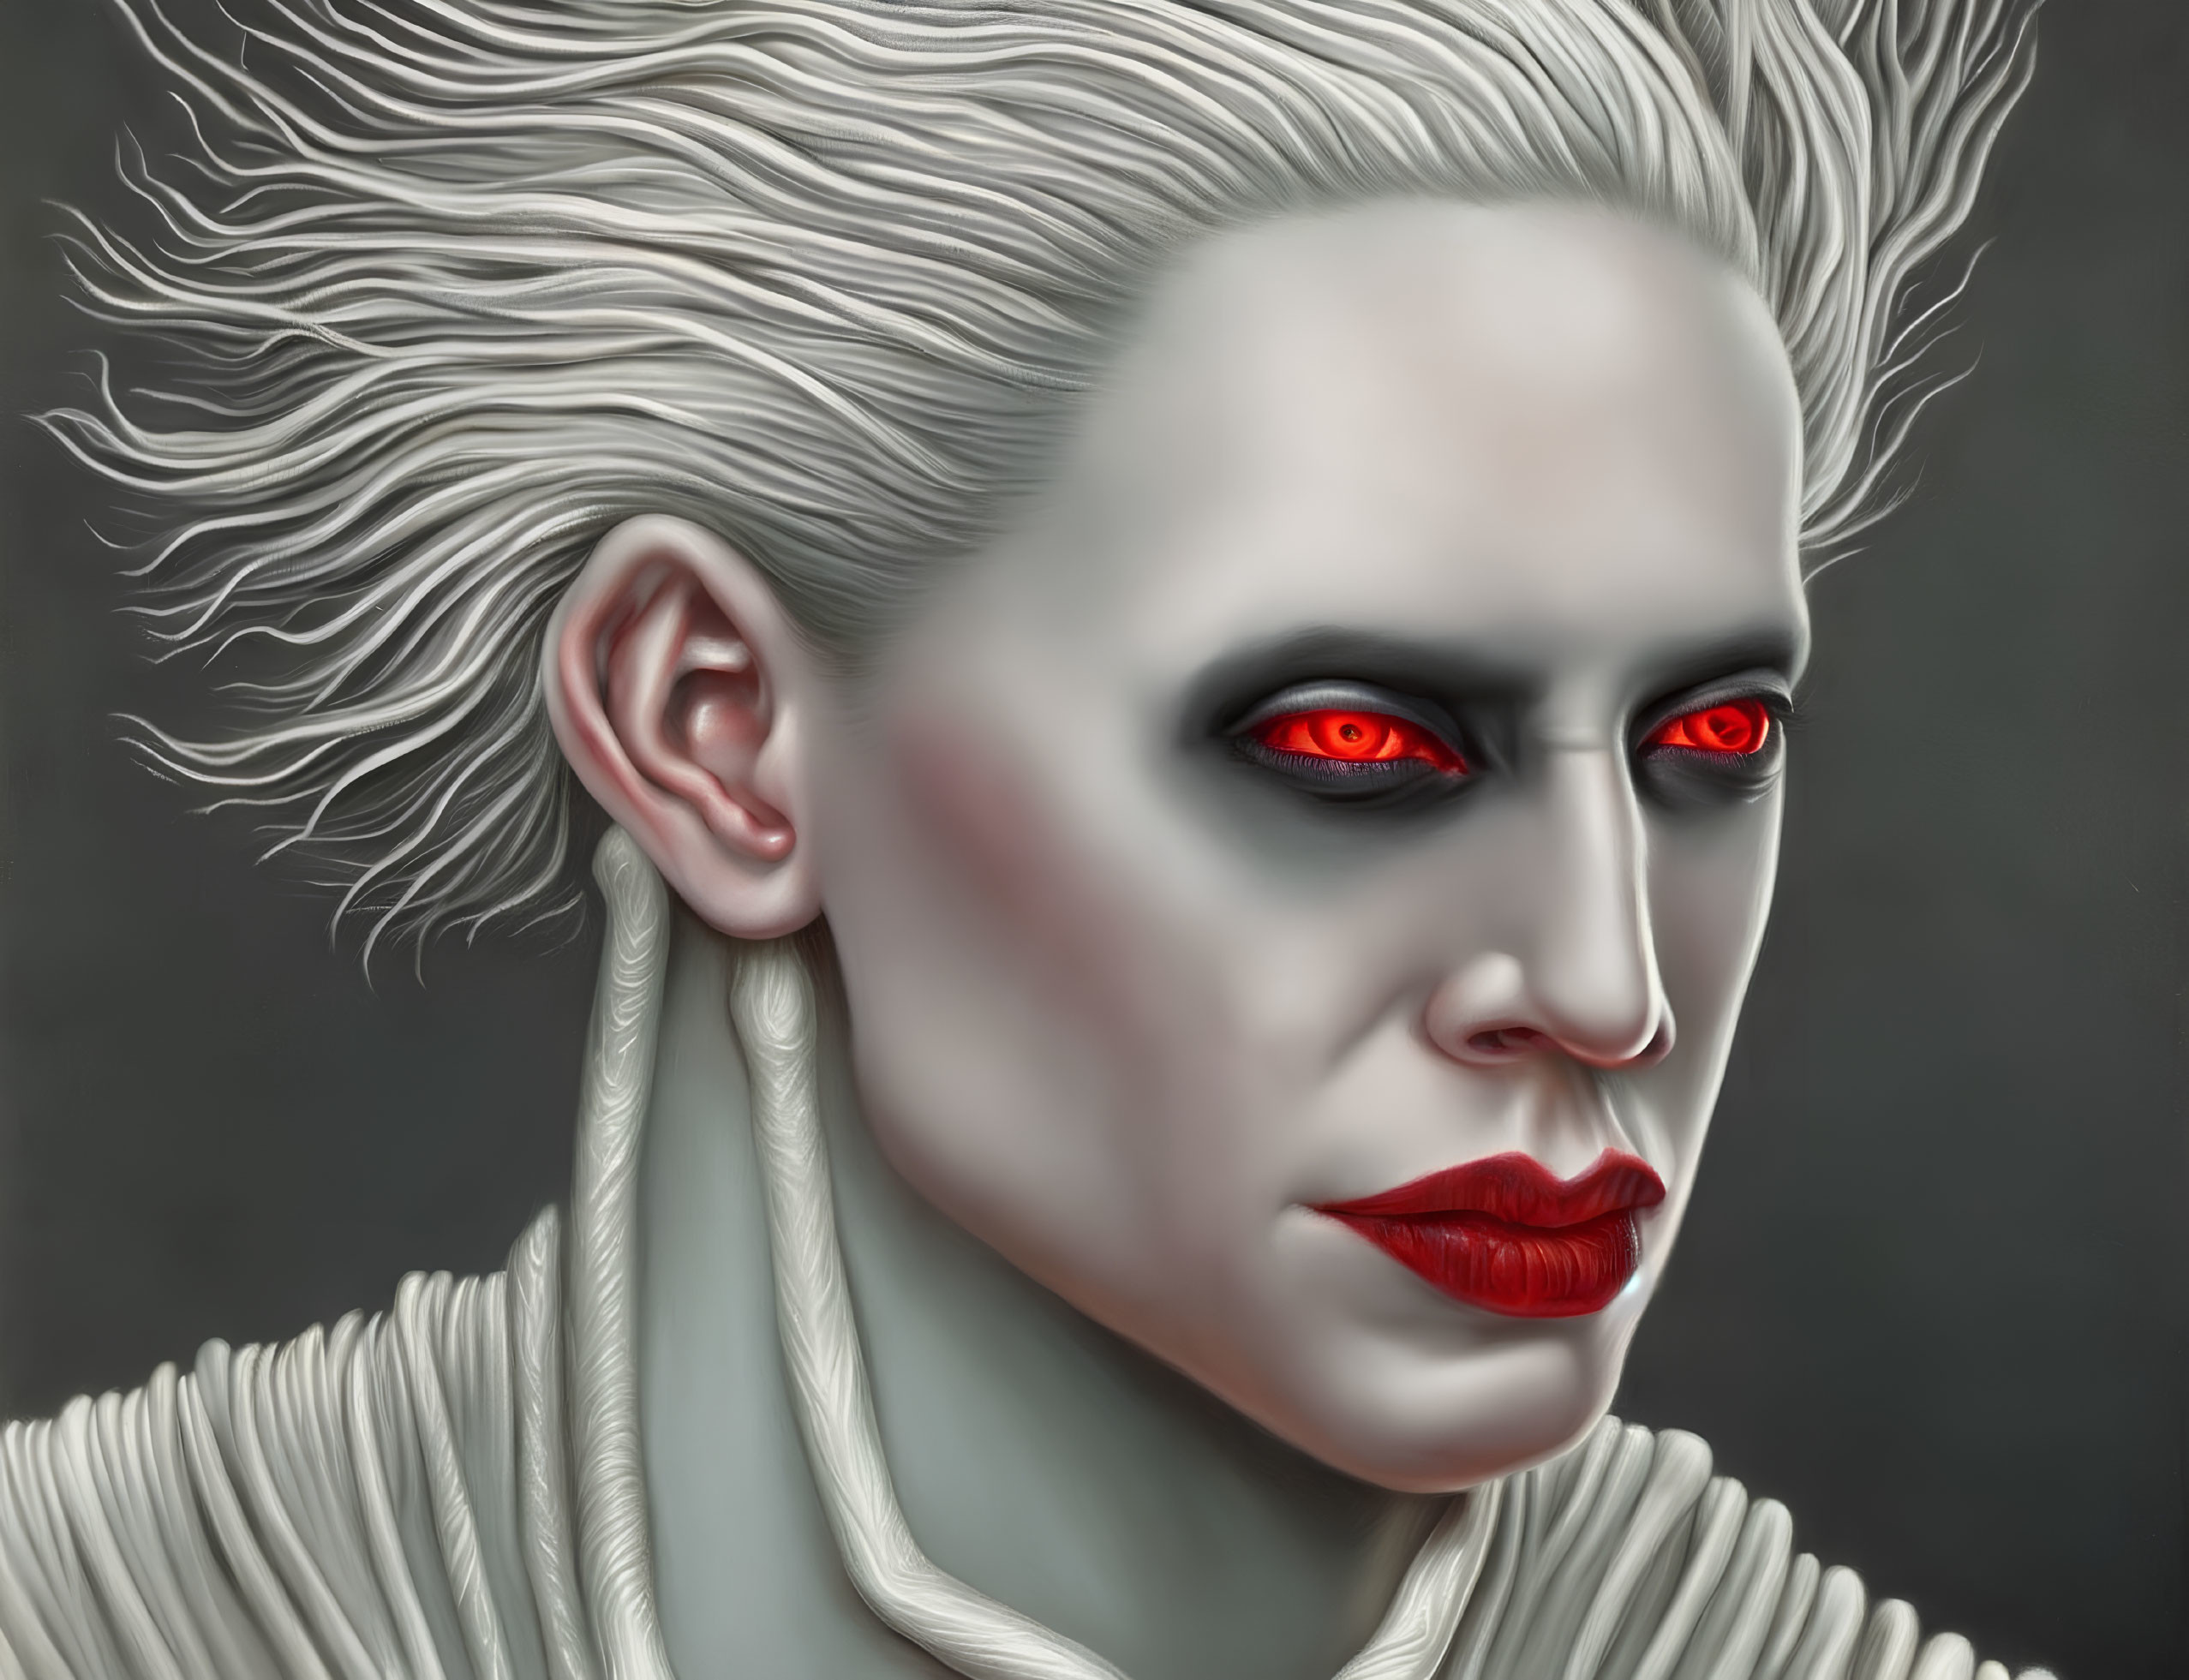 Portrait of person with pale skin, white hair, red eyes, and red lipstick on grey background